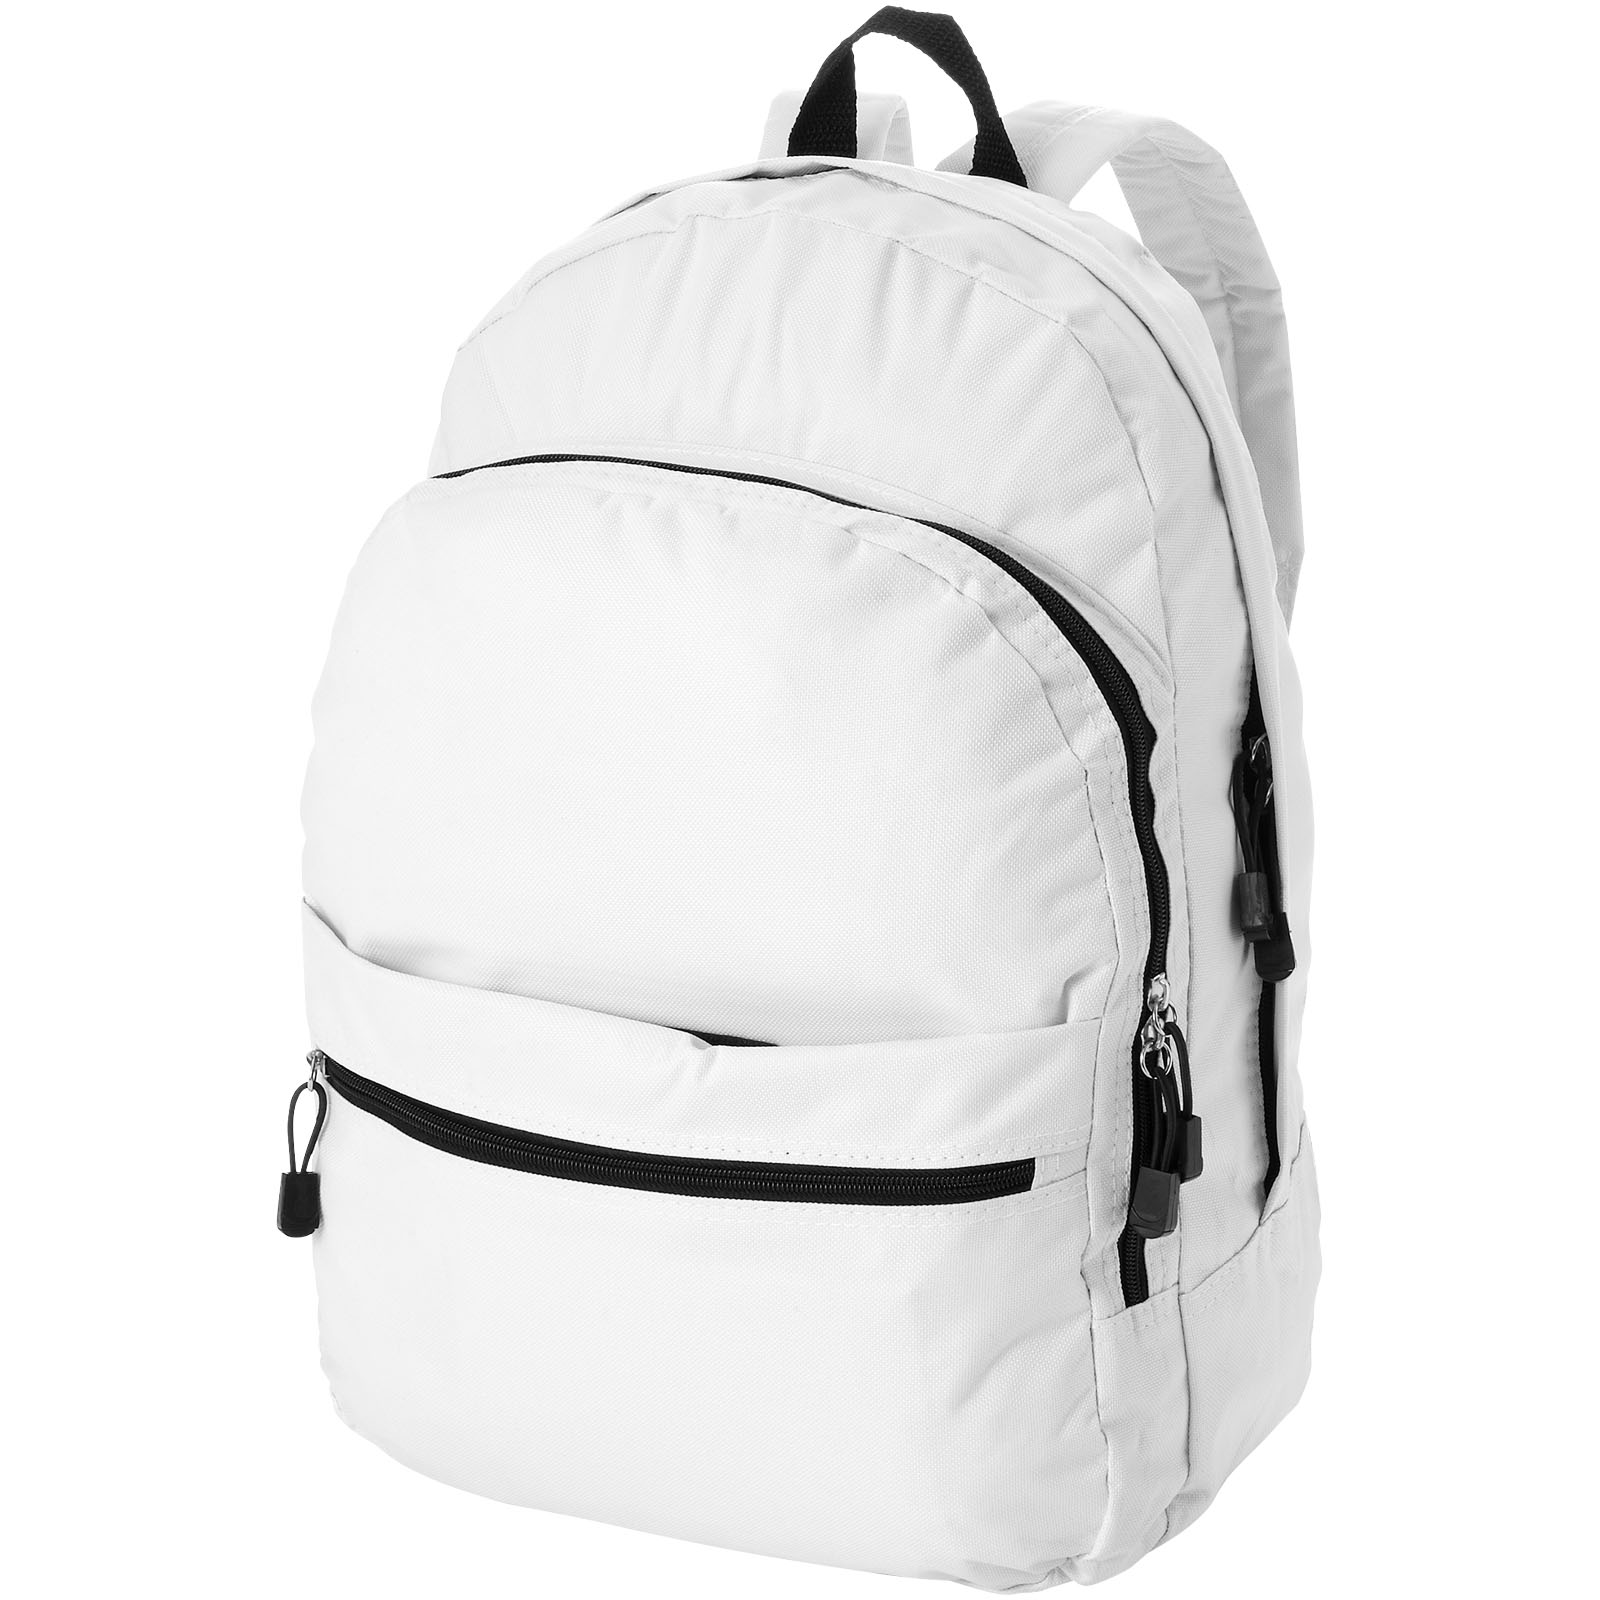 Bags - Trend 4-compartment backpack 17L